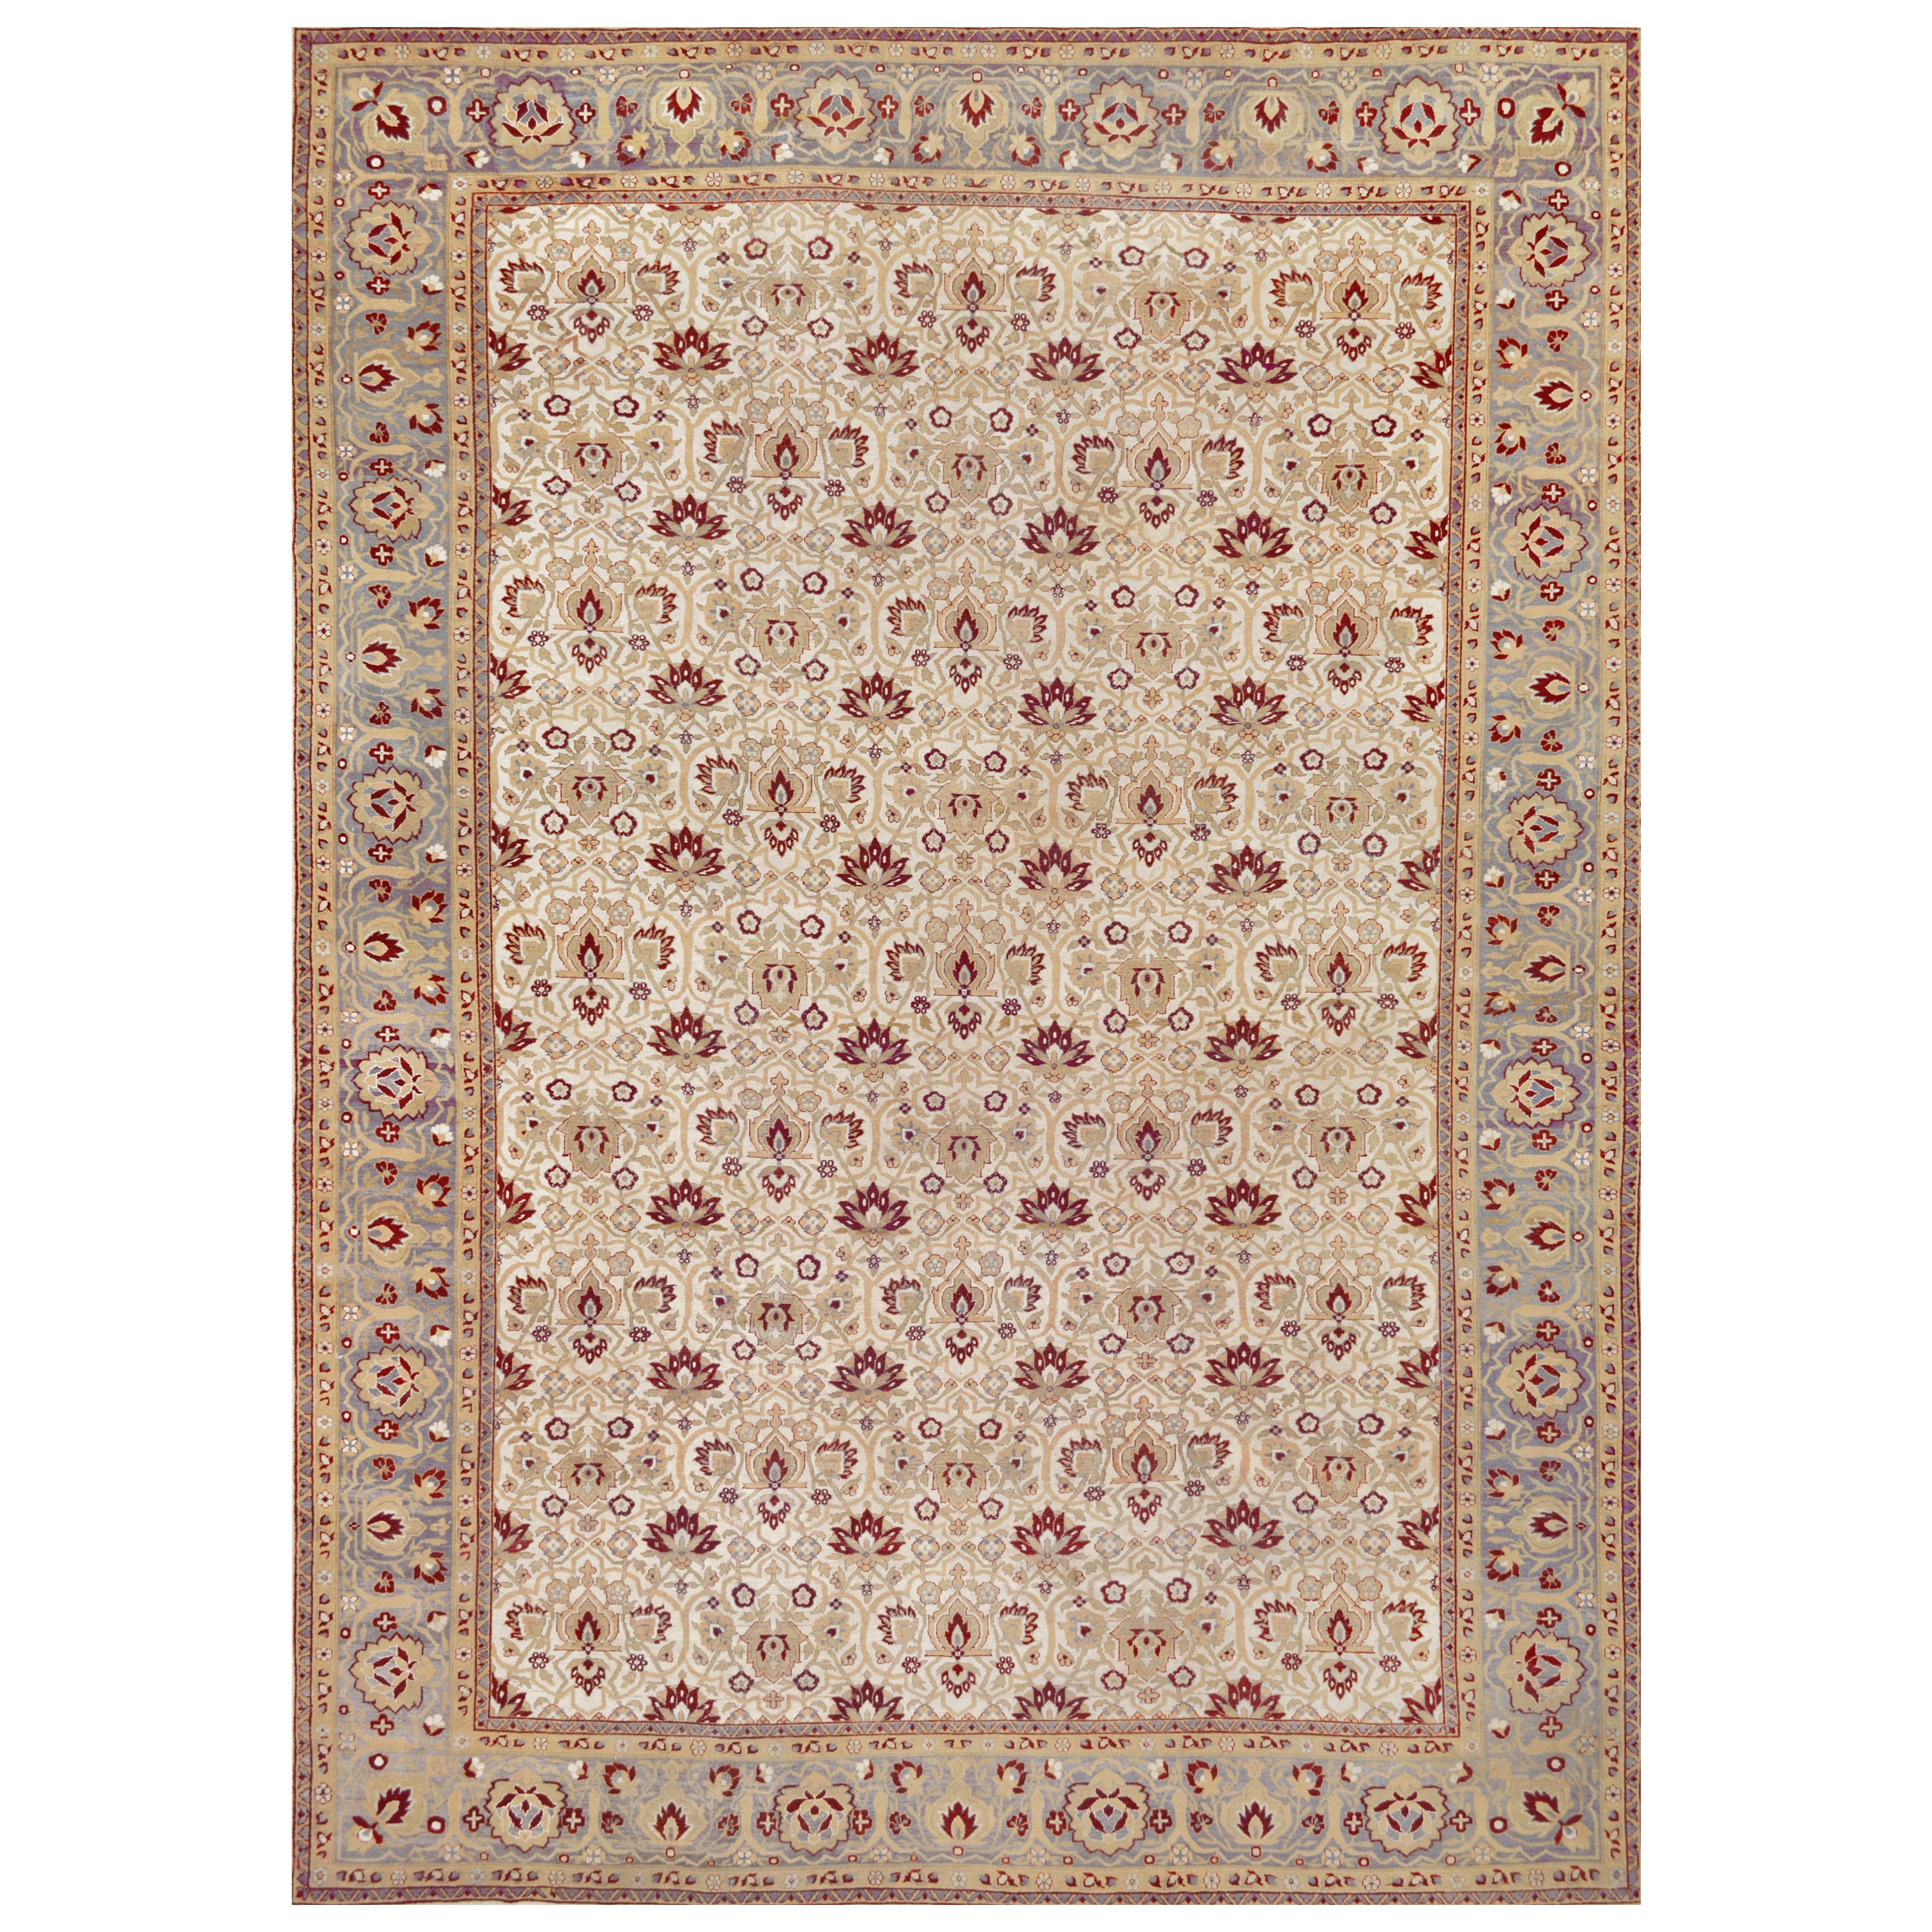 Late 19th Century Large Handwoven Agra Wool Rug